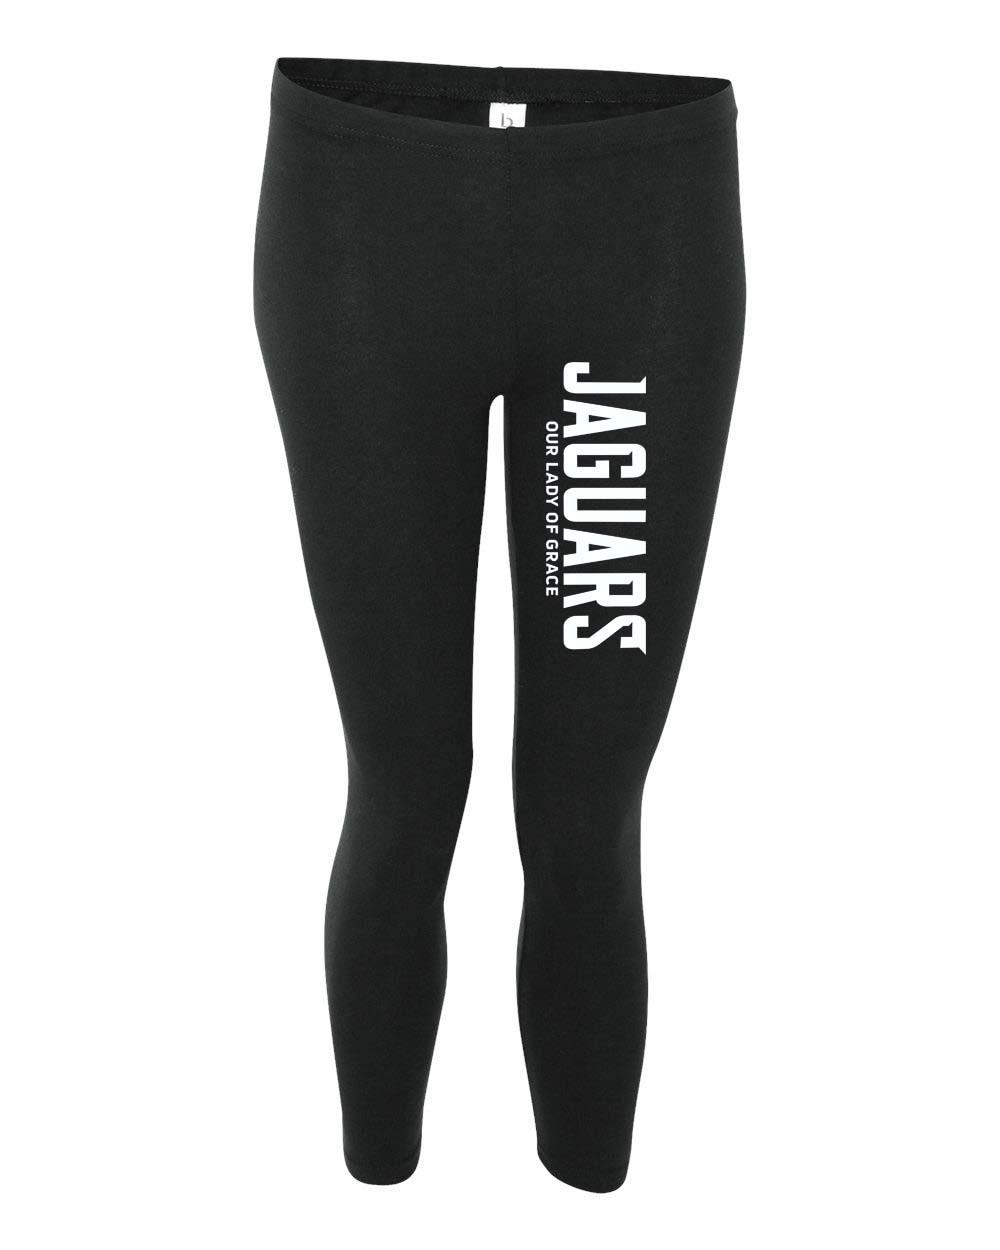 OLG Staff Leggings w/ White Logo - Please Allow 2-3 Weeks for Delivery